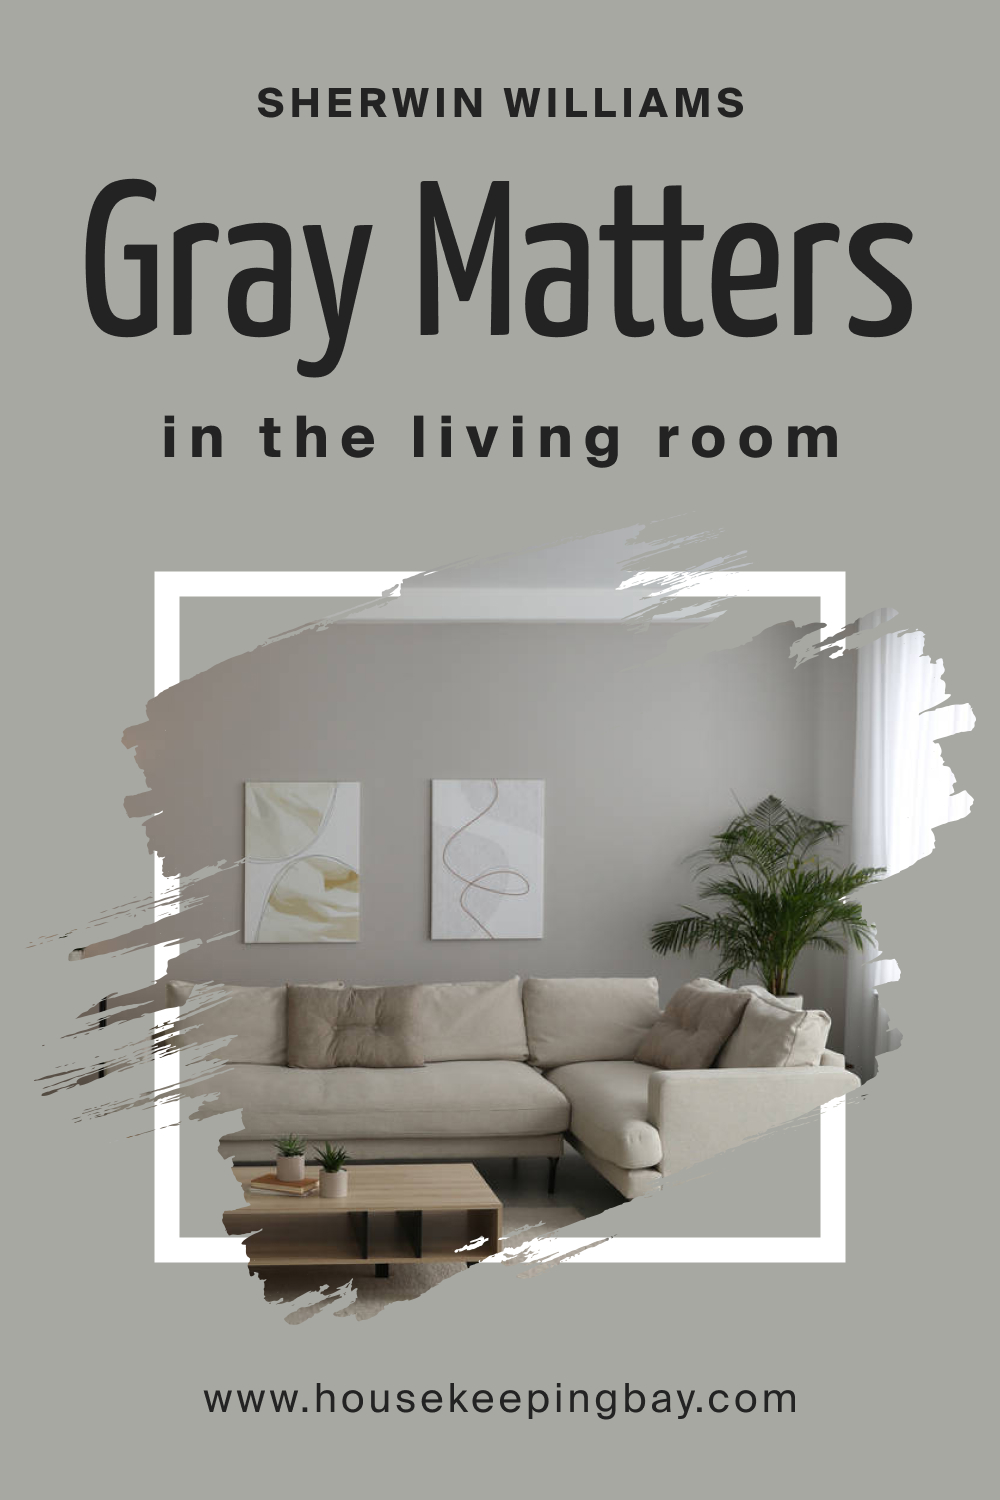 Sherwin Williams. Gray Matters SW 7066 In the Living Room